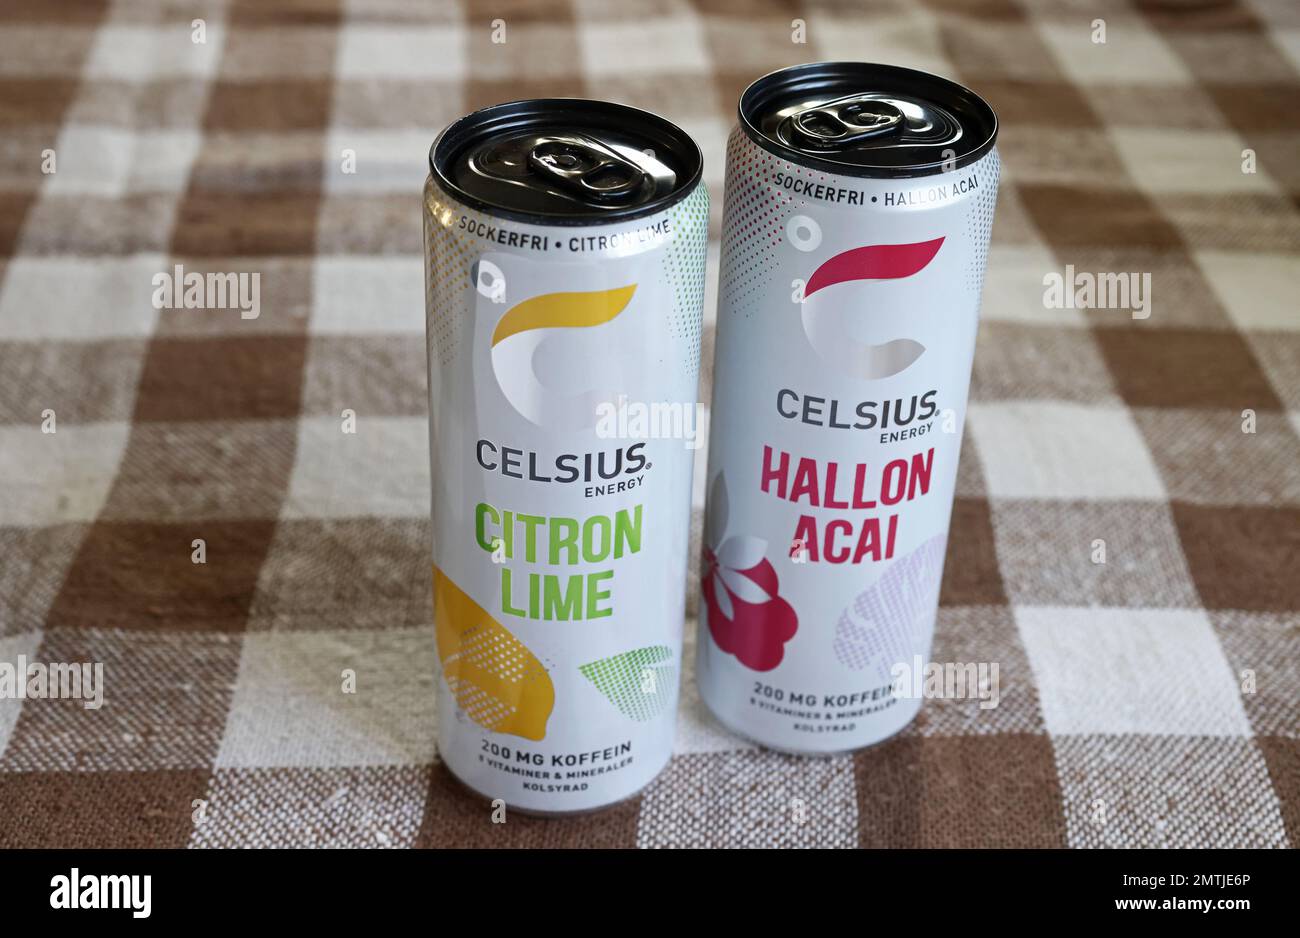 American energy drink manufacturer Celsius Stock Photo - Alamy